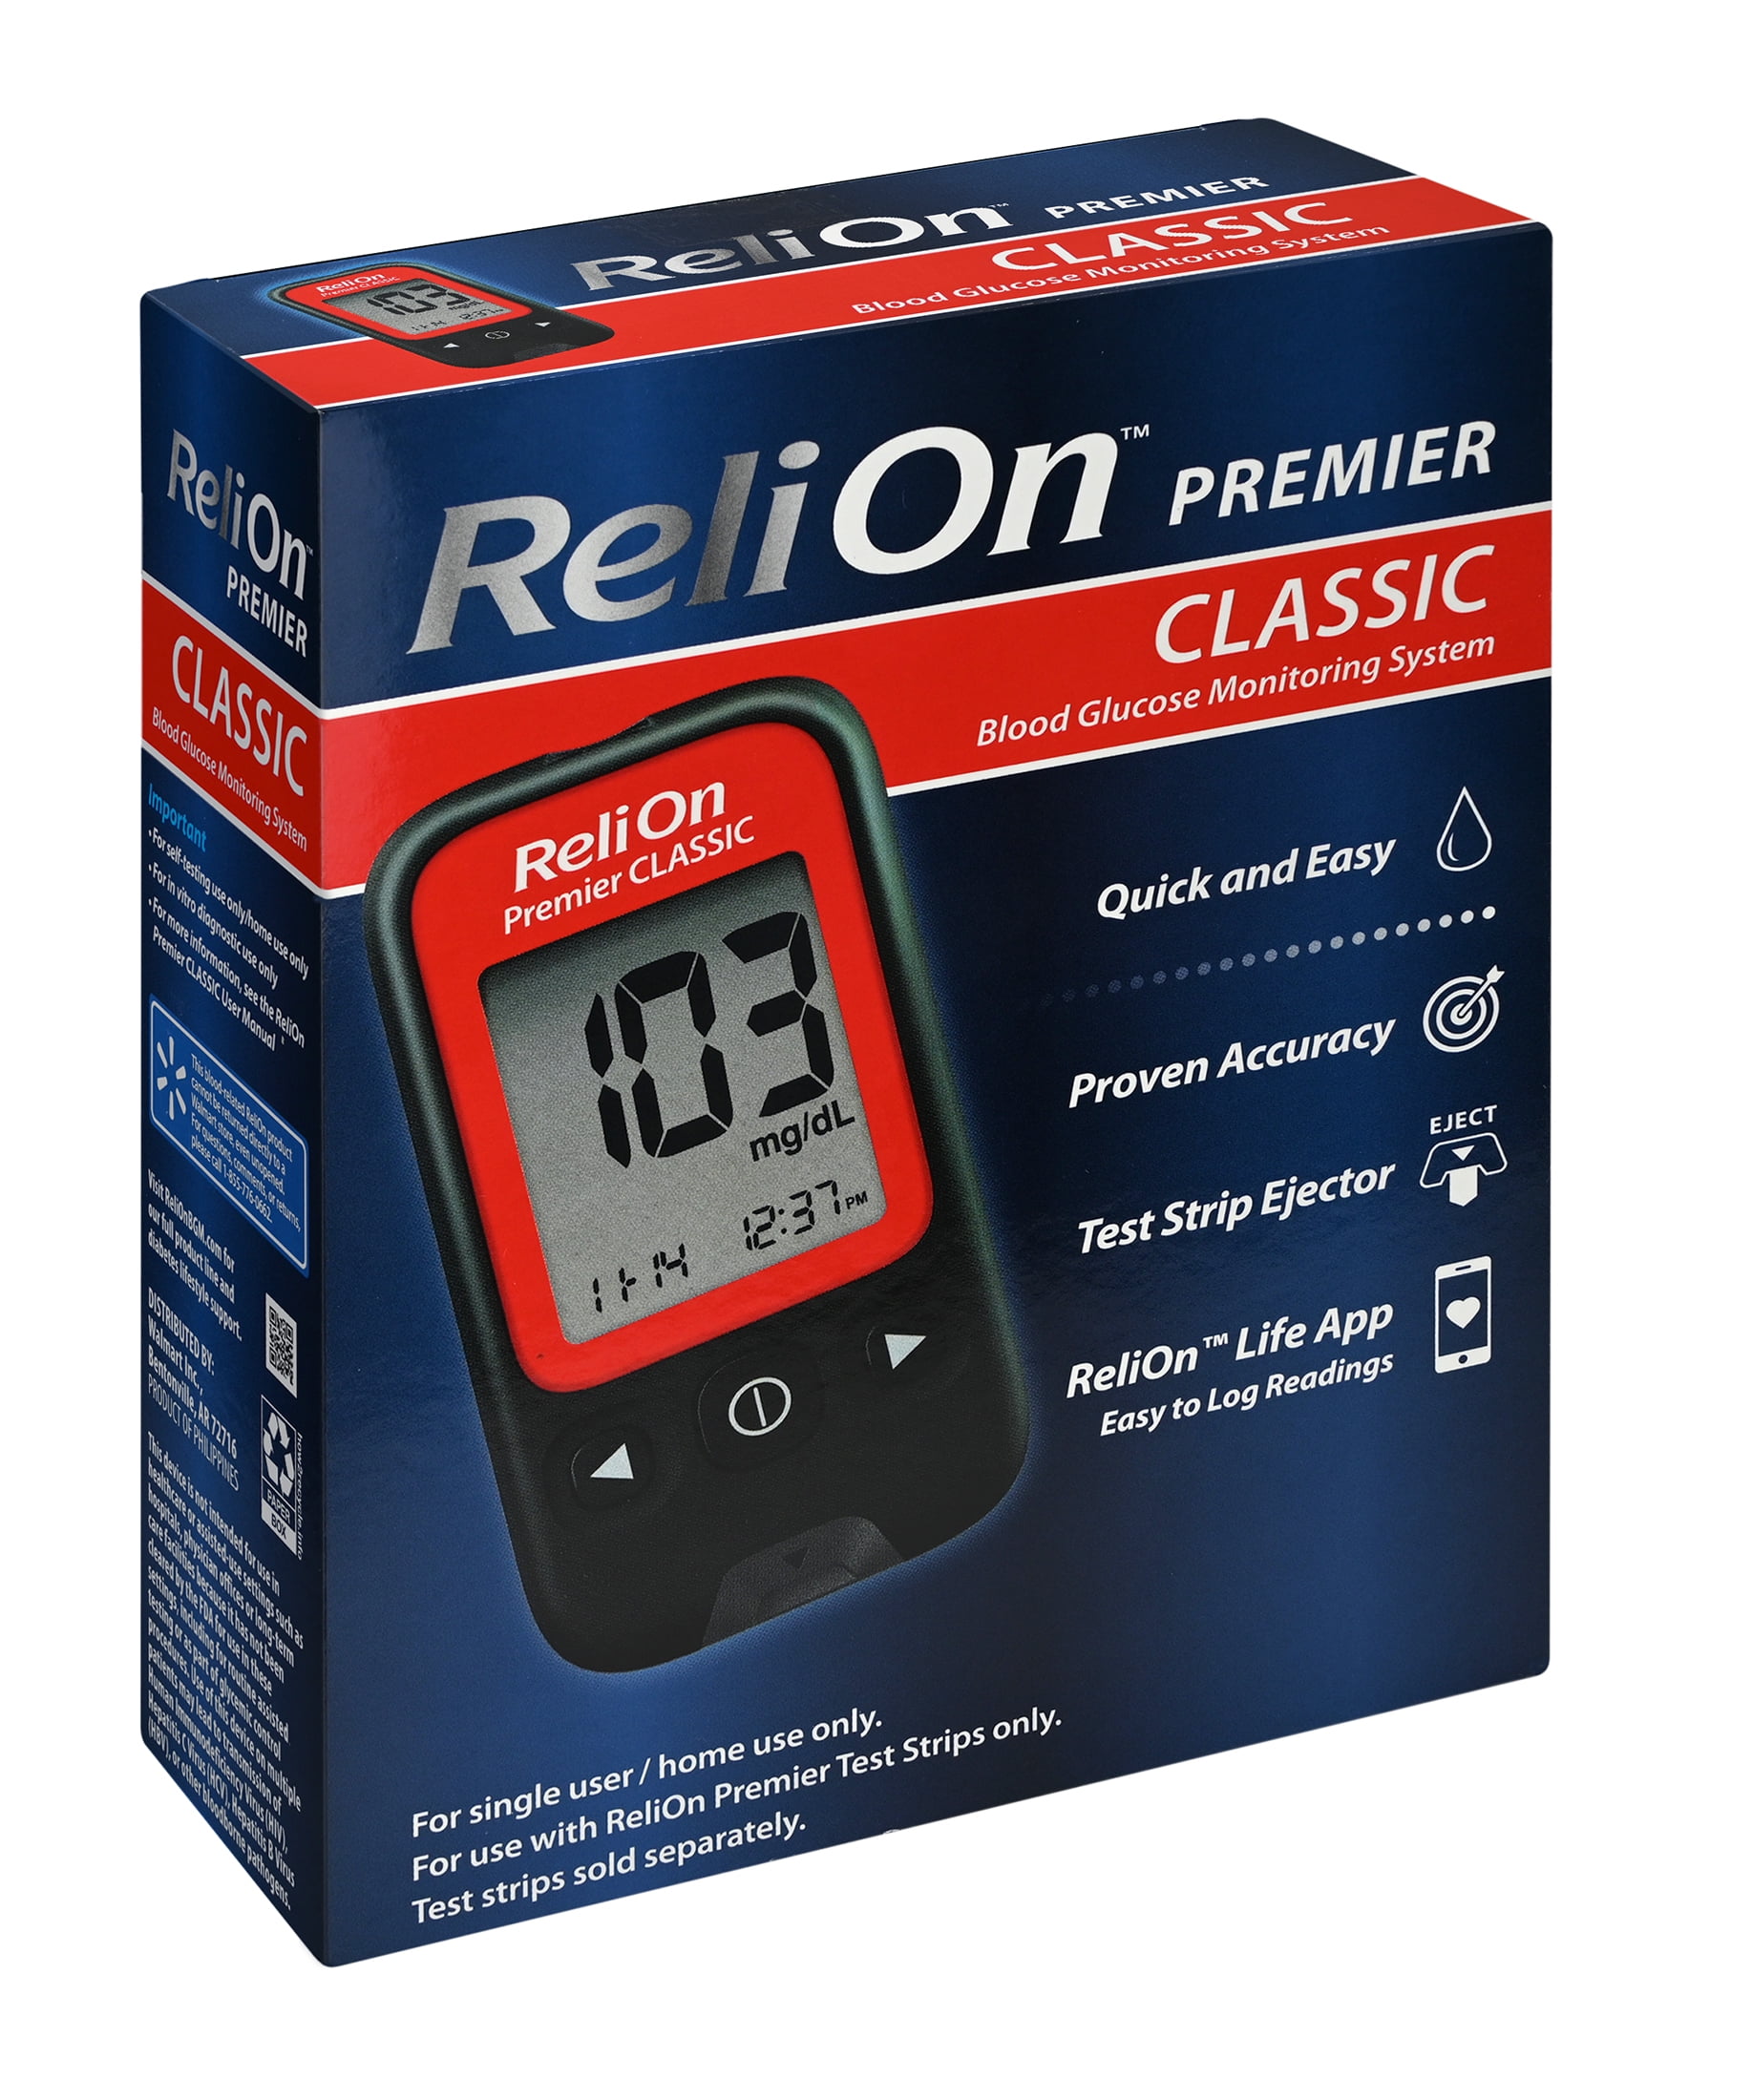 ReliOn Premier CLASSIC Blood Glucose Monitoring System